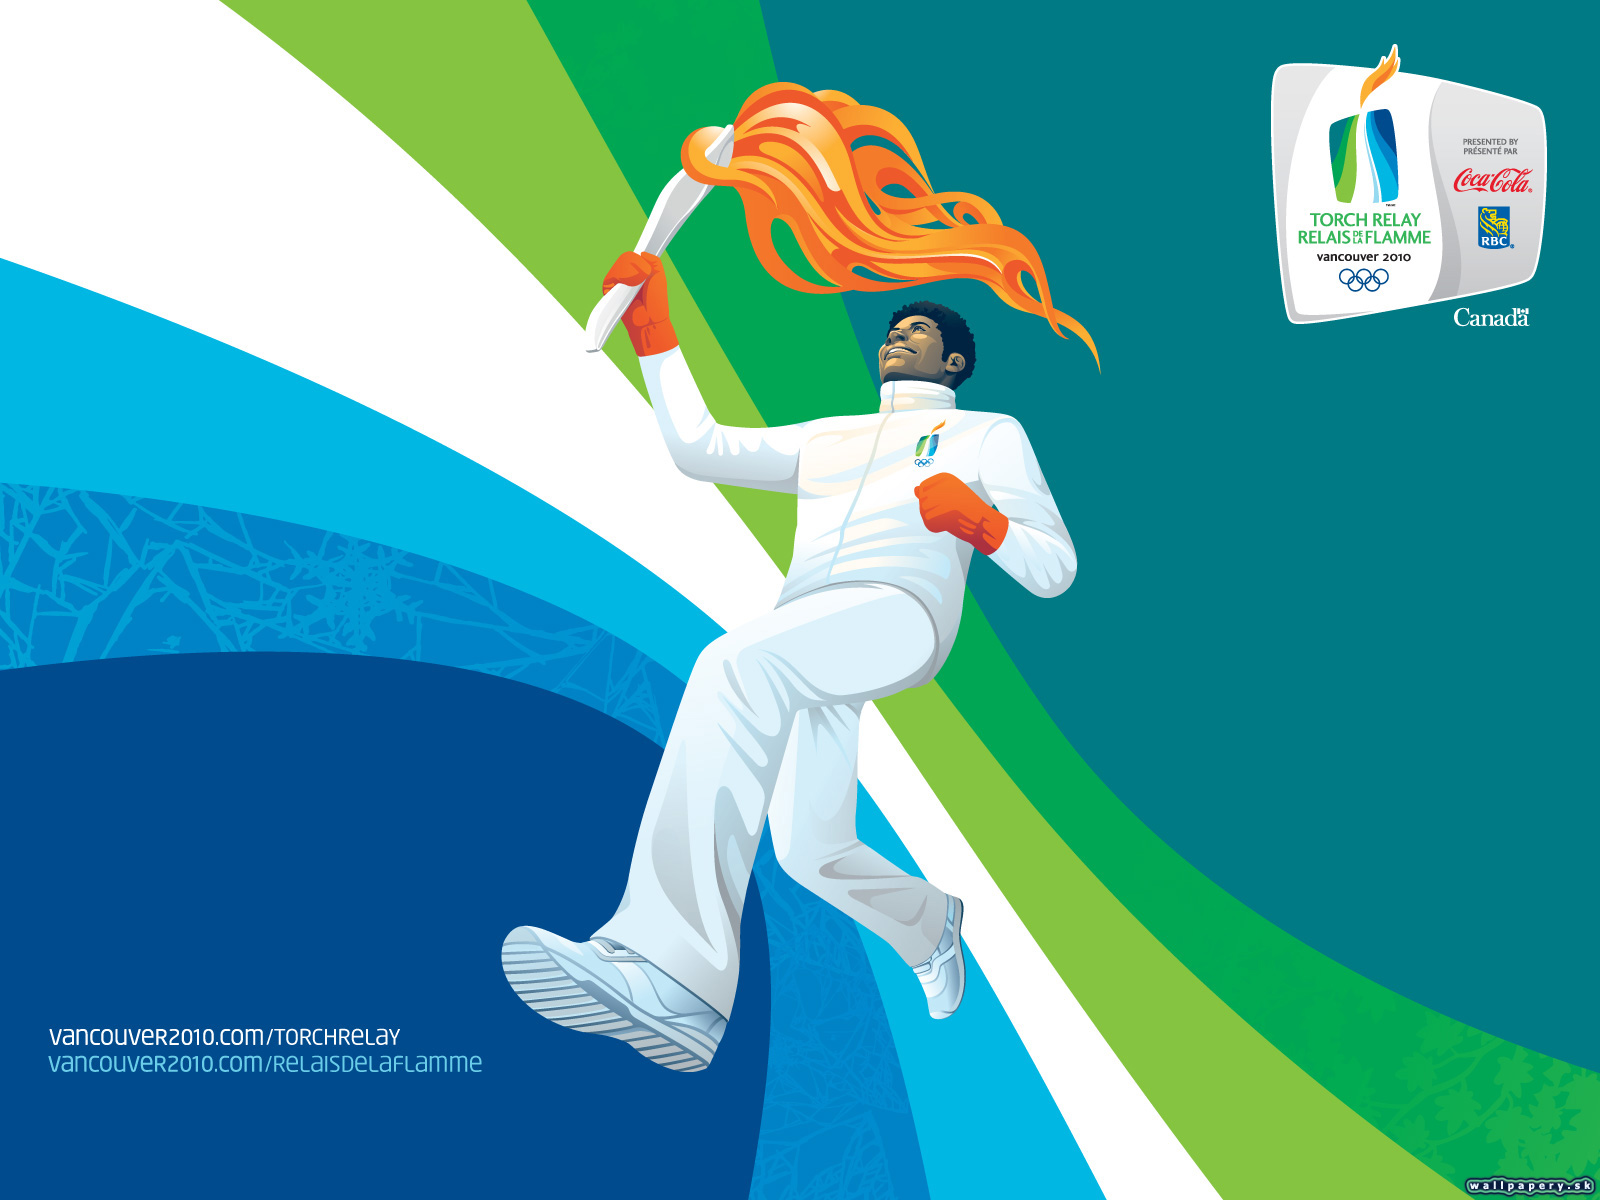 Vancouver 2010 - The Official Video Game of the Olympic Winter Games - wallpaper 2